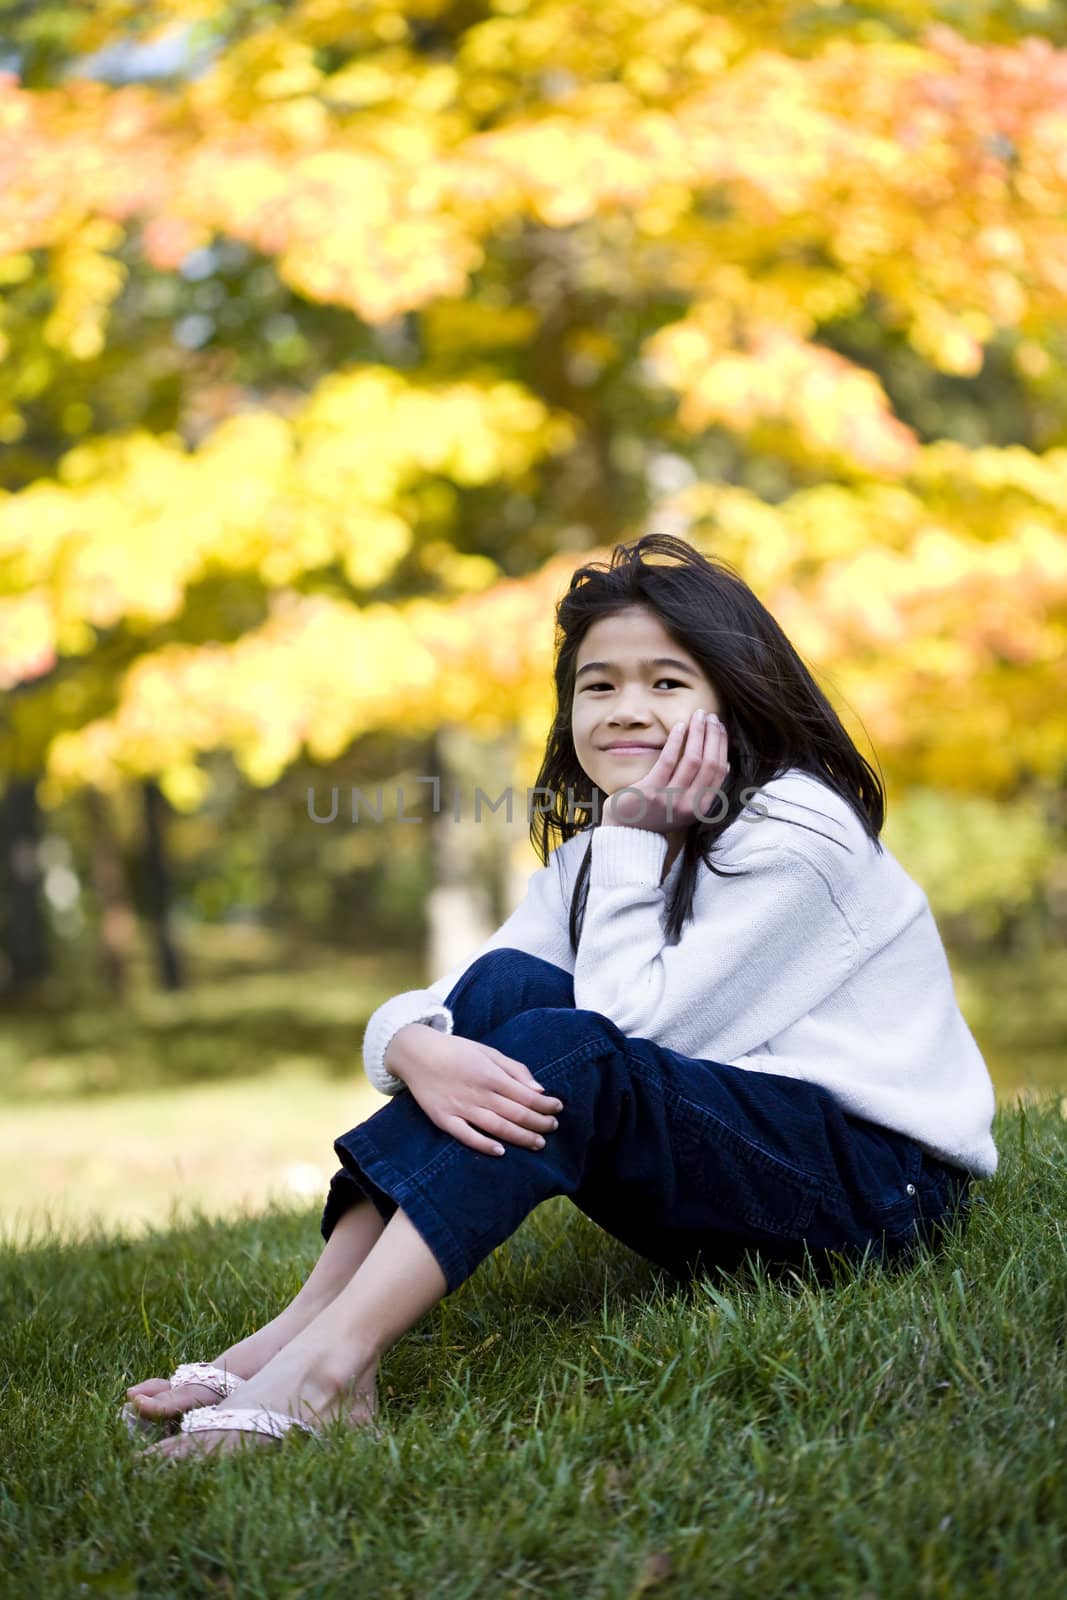 Girl sitting on grass with bright colorful autumn leaves in background